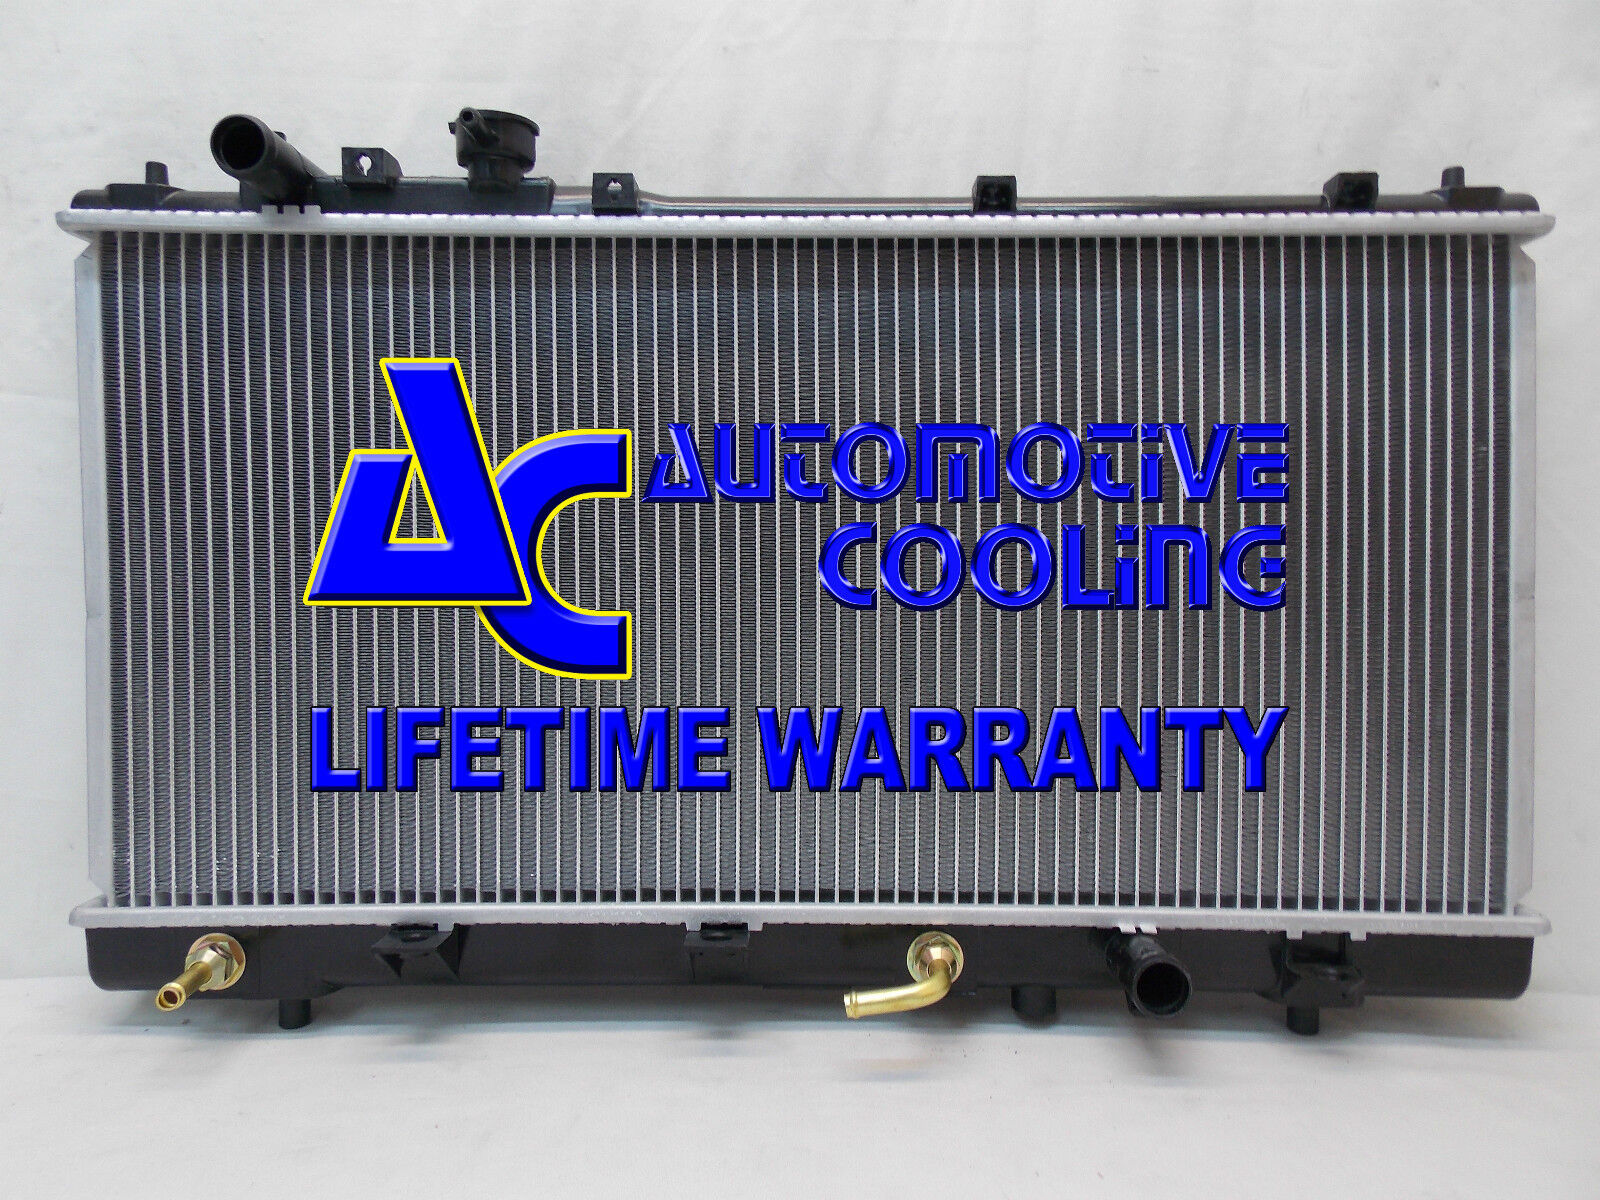 RADIATOR FOR MAZDA PROTEGE5 03 2.0 L4 4 CYL COOLING RADIADOR NEW .ACR2303